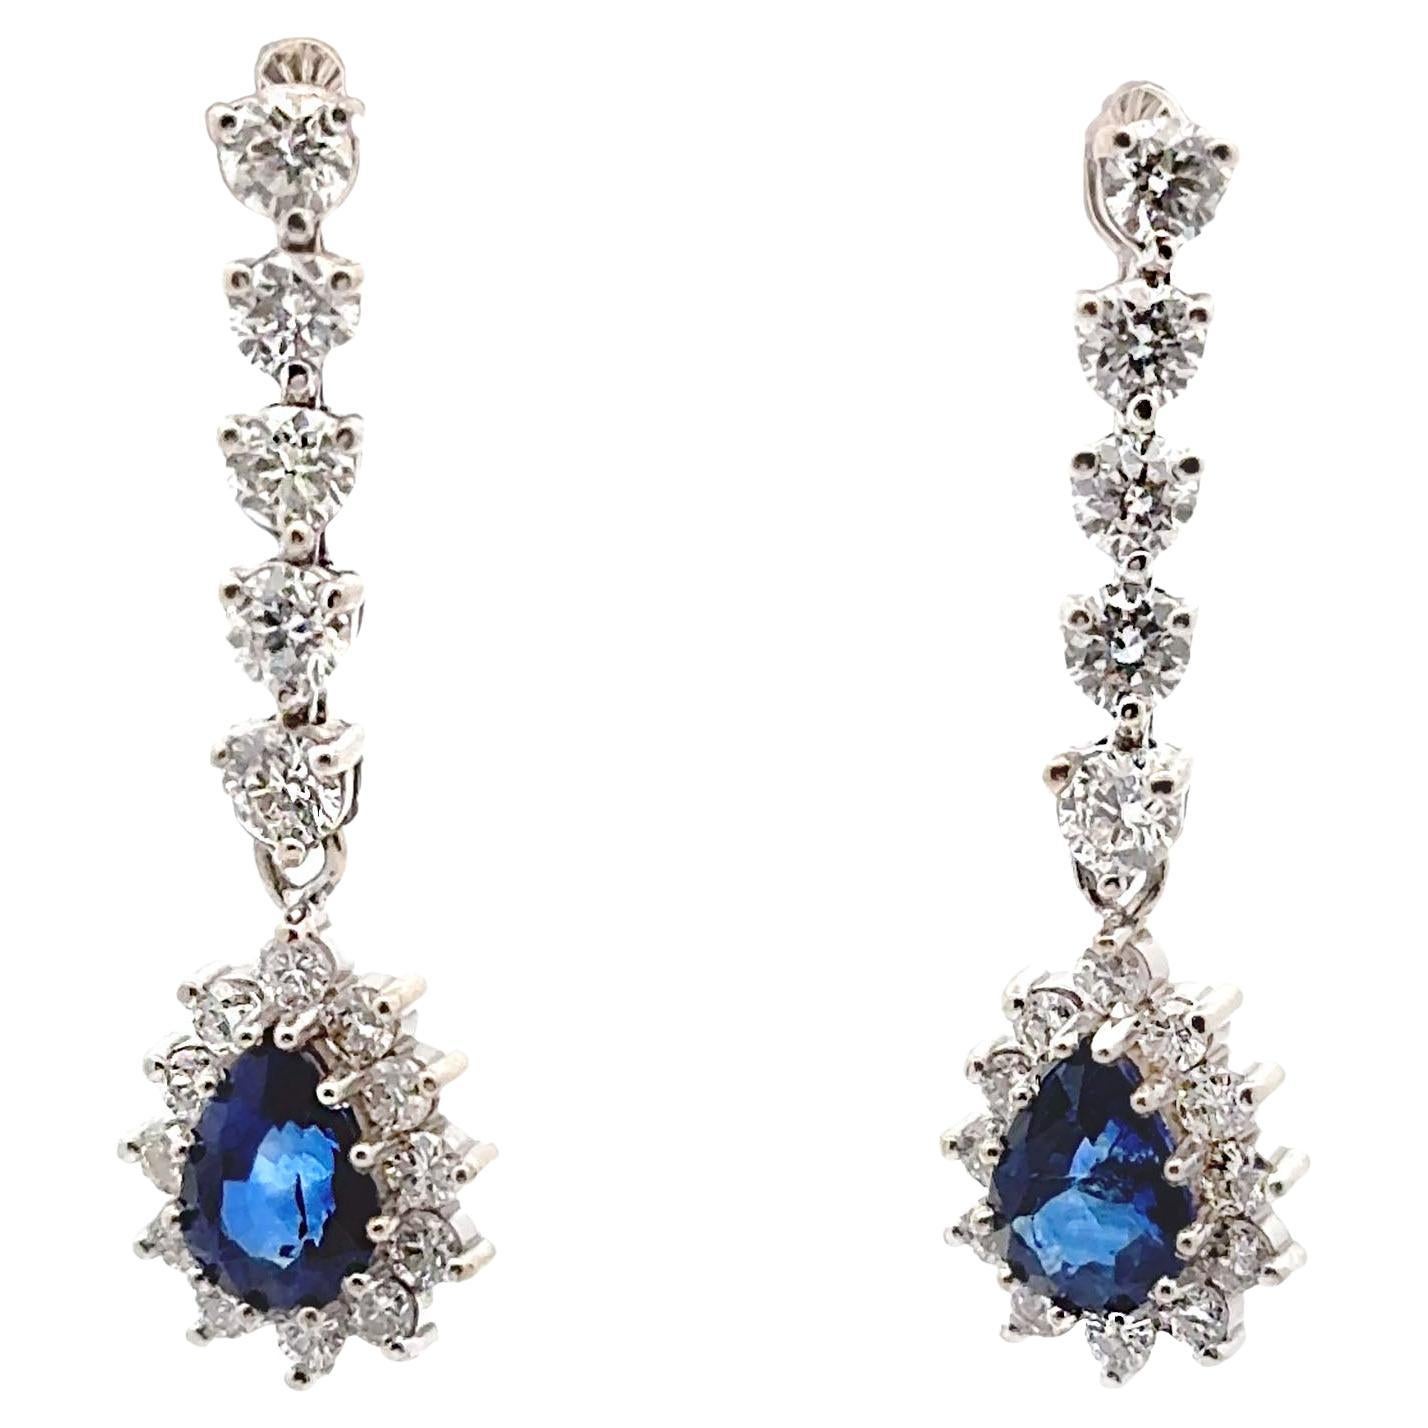 14k White Gold Long Earrings with Diamonds and Sapphires